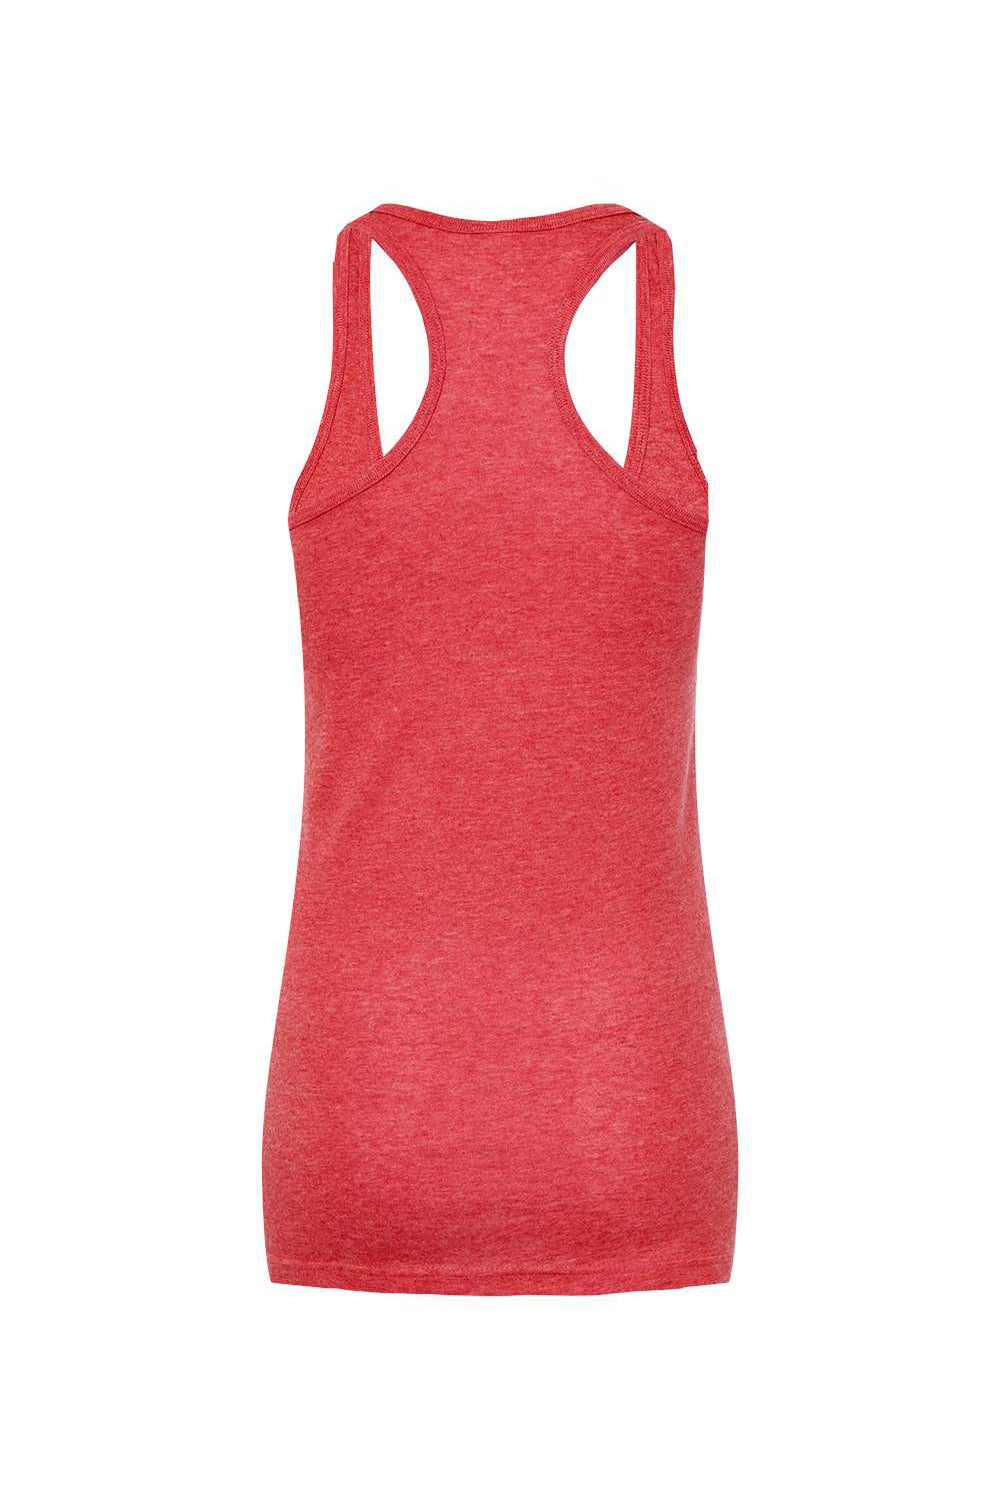 Tultex 190 Womens Poly-Rich Racerback Tank Top Heather Red Flat Back